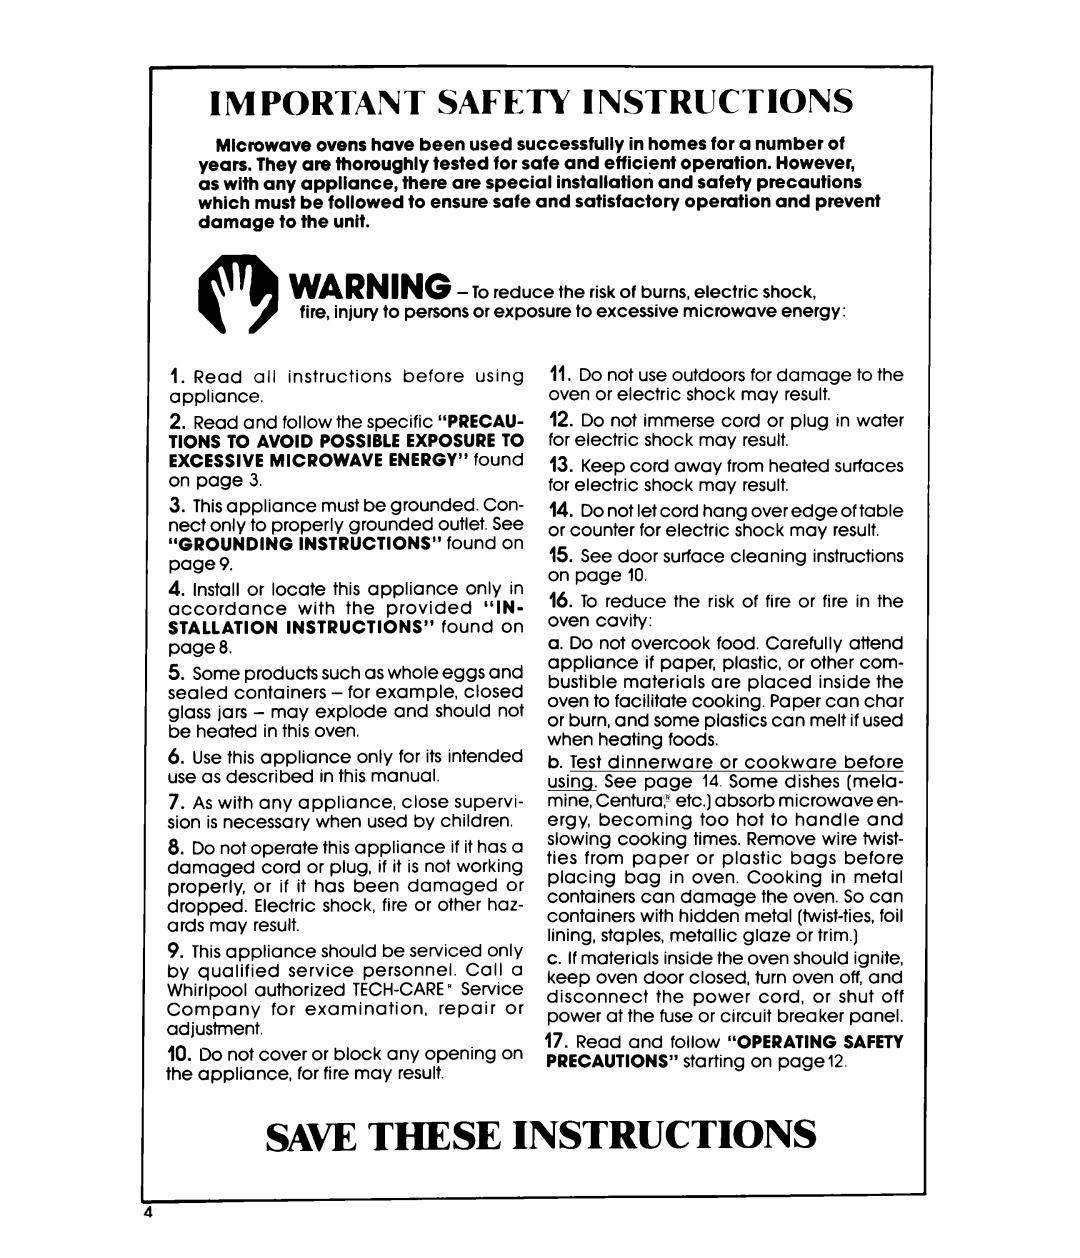 Whirlpool MW32OOXS manual Saw These Instructions, Important Safety Instructions 